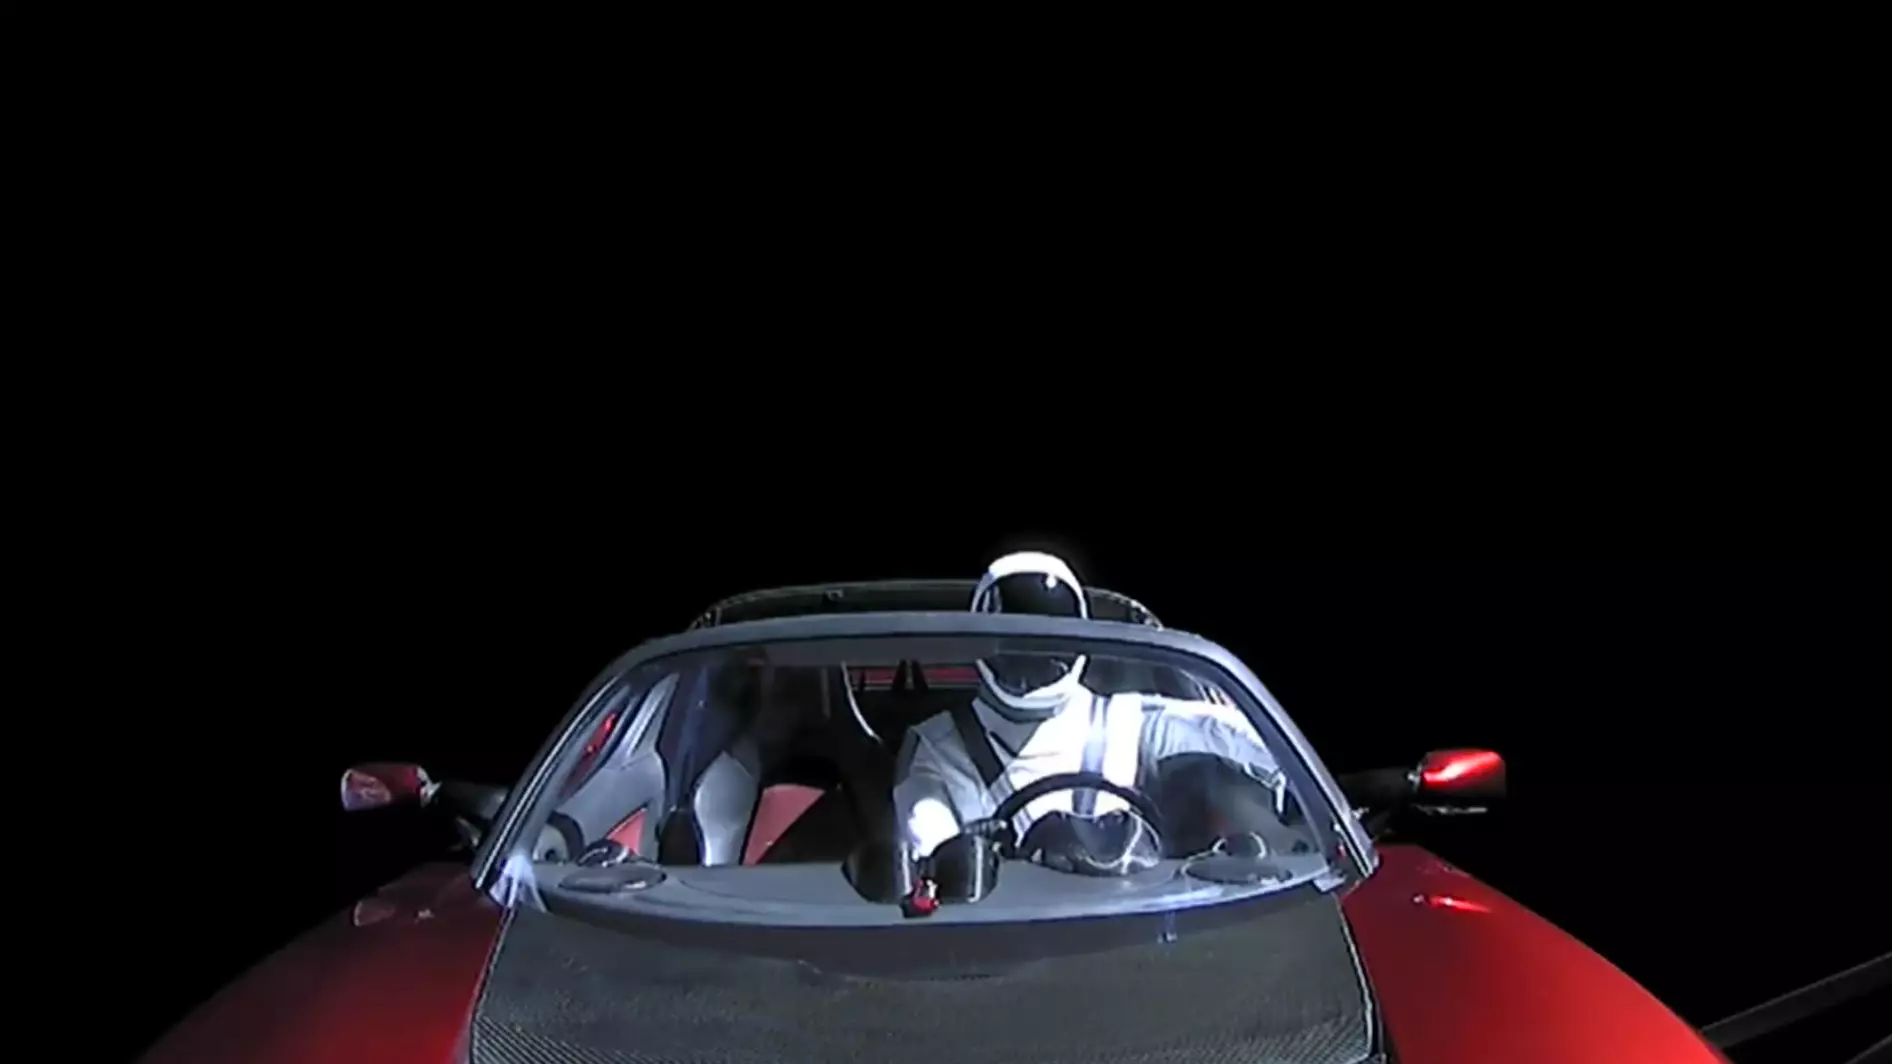 Why Can't You See The Stars In Elon Musk's Tesla Roadster Space Video?